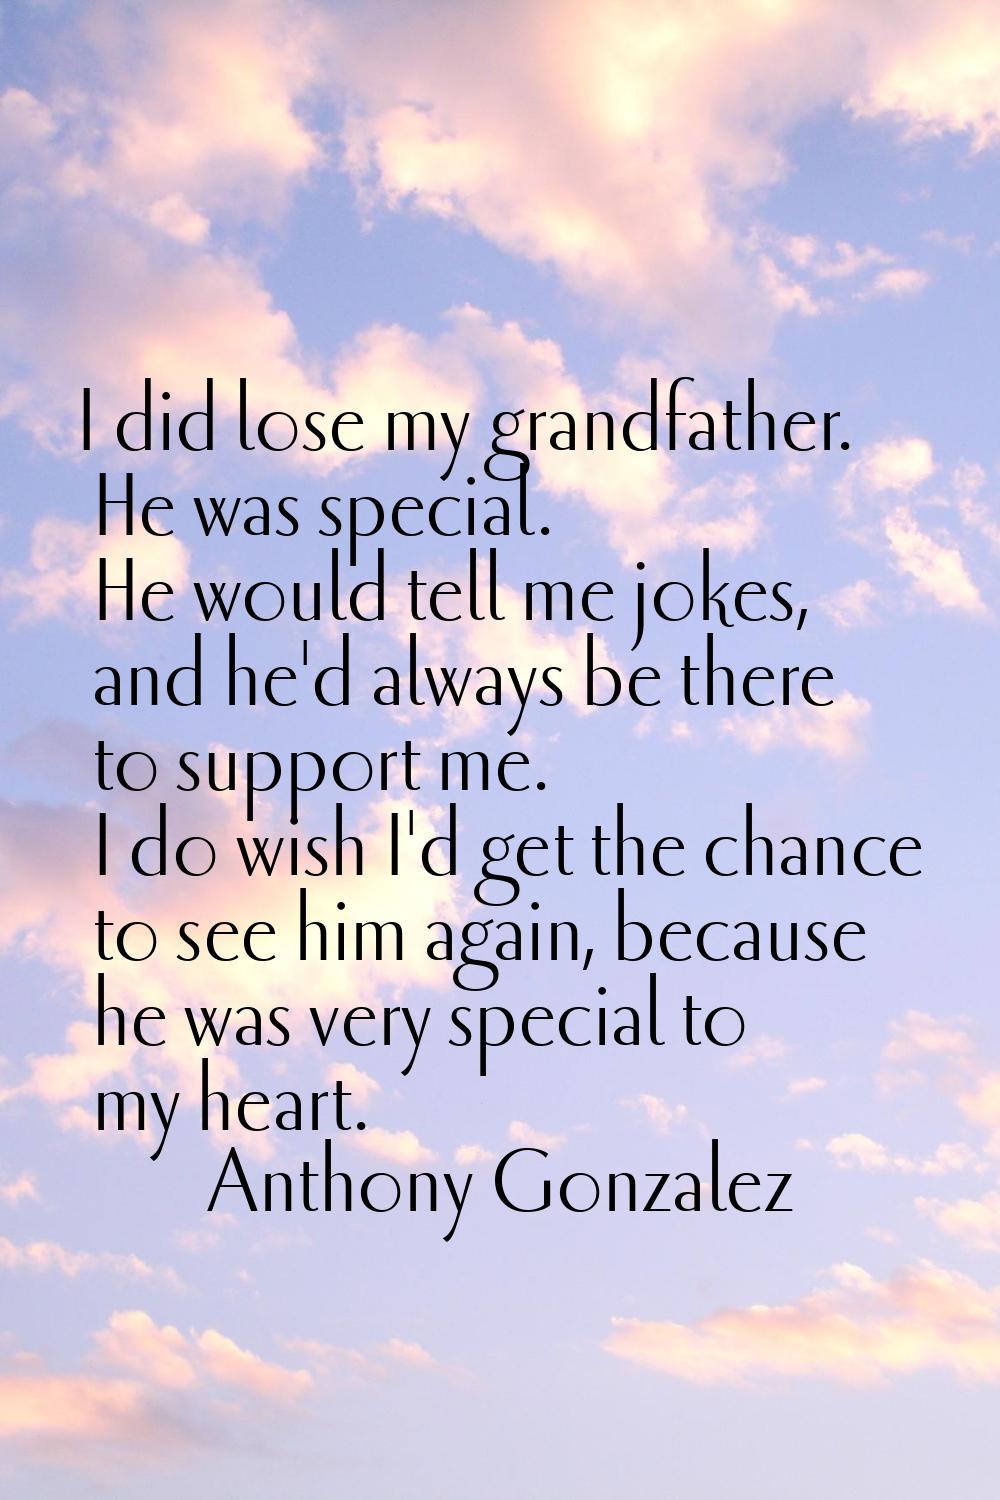 I did lose my grandfather. He was special. He would tell me jokes, and he'd always be there to supp